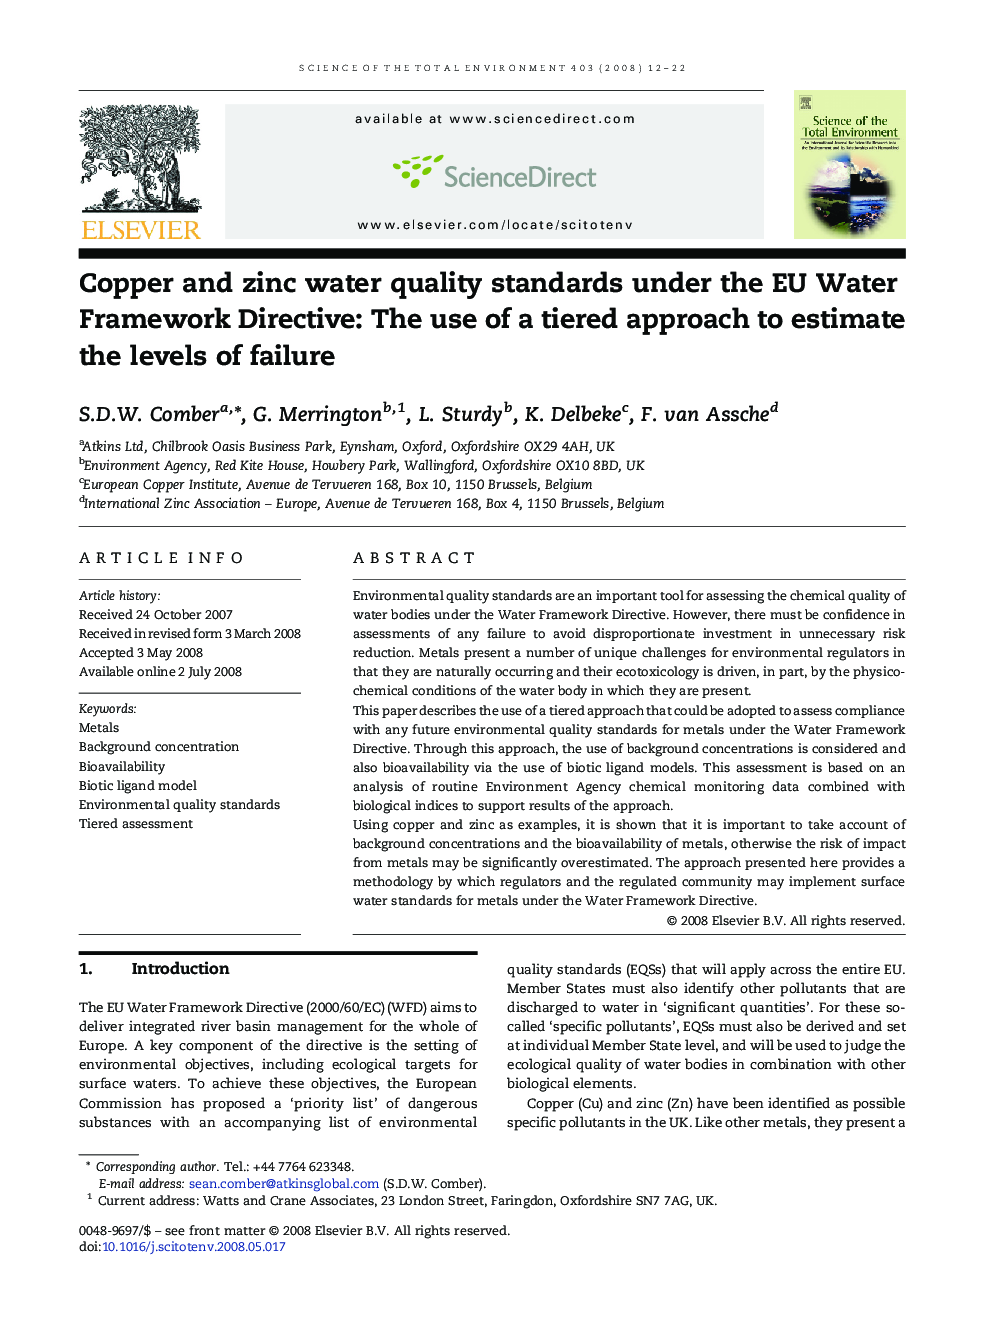 Copper and zinc water quality standards under the EU Water Framework Directive: The use of a tiered approach to estimate the levels of failure